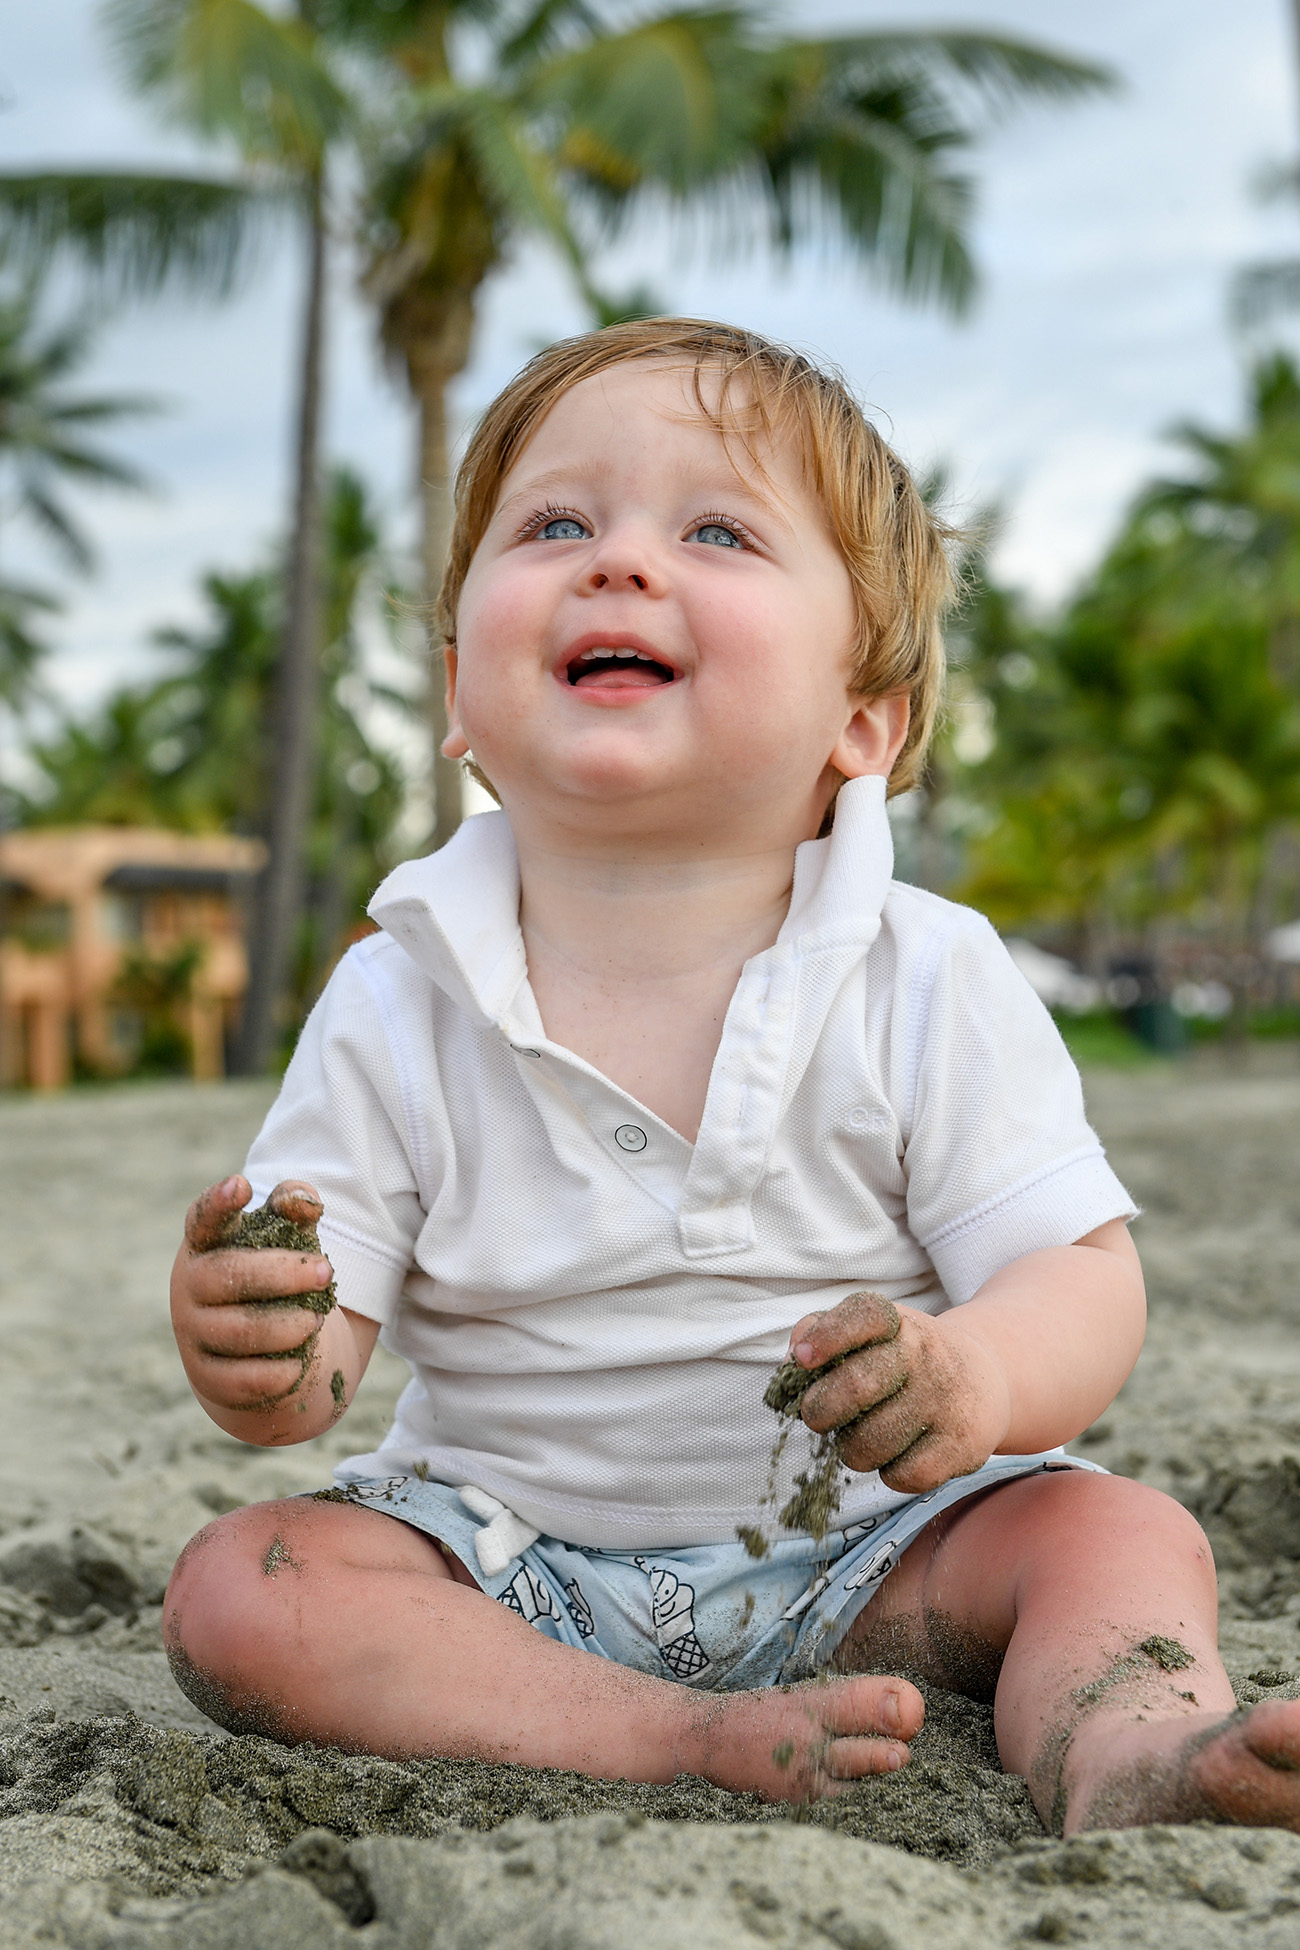 A baby gets his hands dirty while seated on the beach